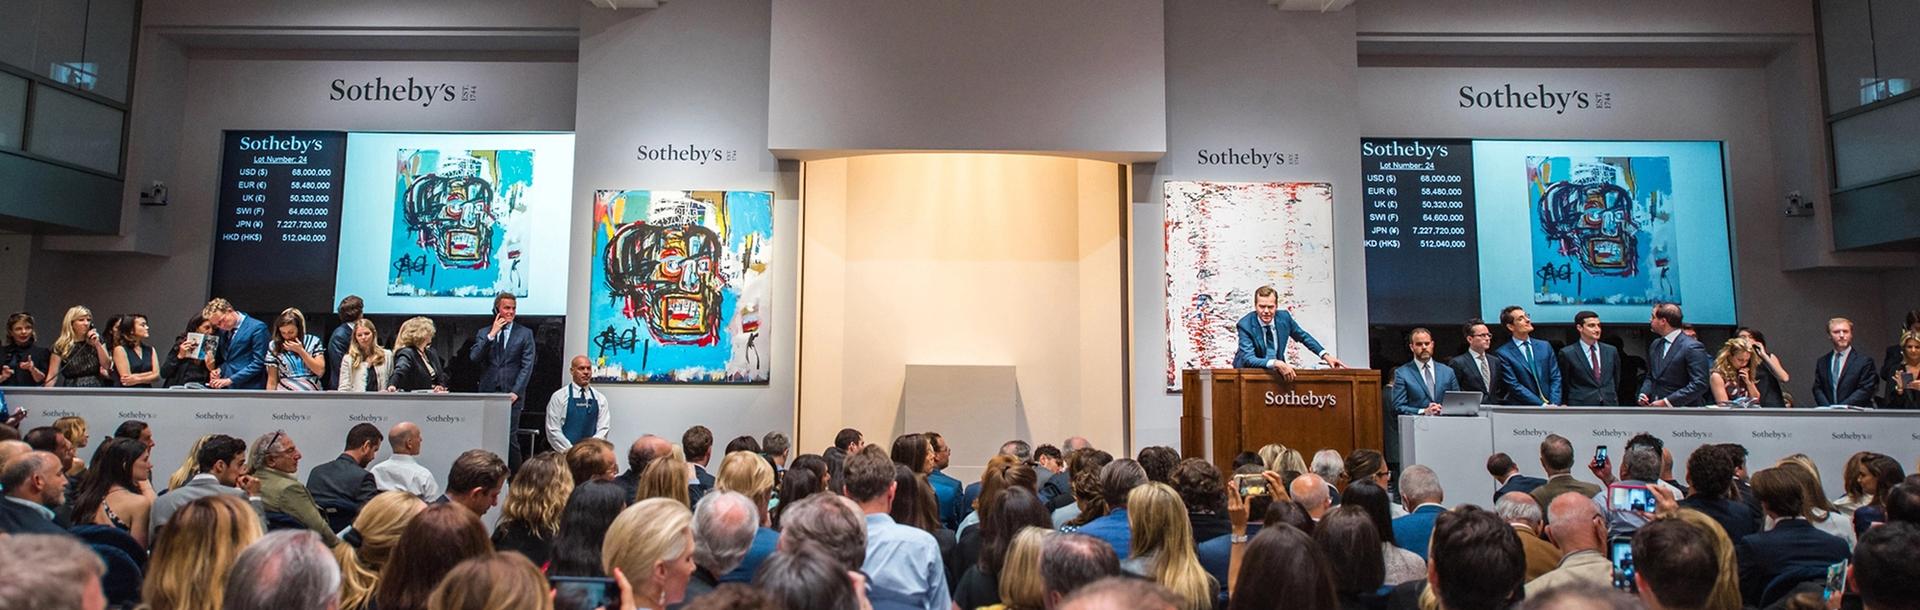 Auctioneer Oliver Barker took the winning bid on Jean-Michel Basquiat's Untitled (1982), which sold for $110.5m last May at Sotheby's New York Courtesy of Sotheby's